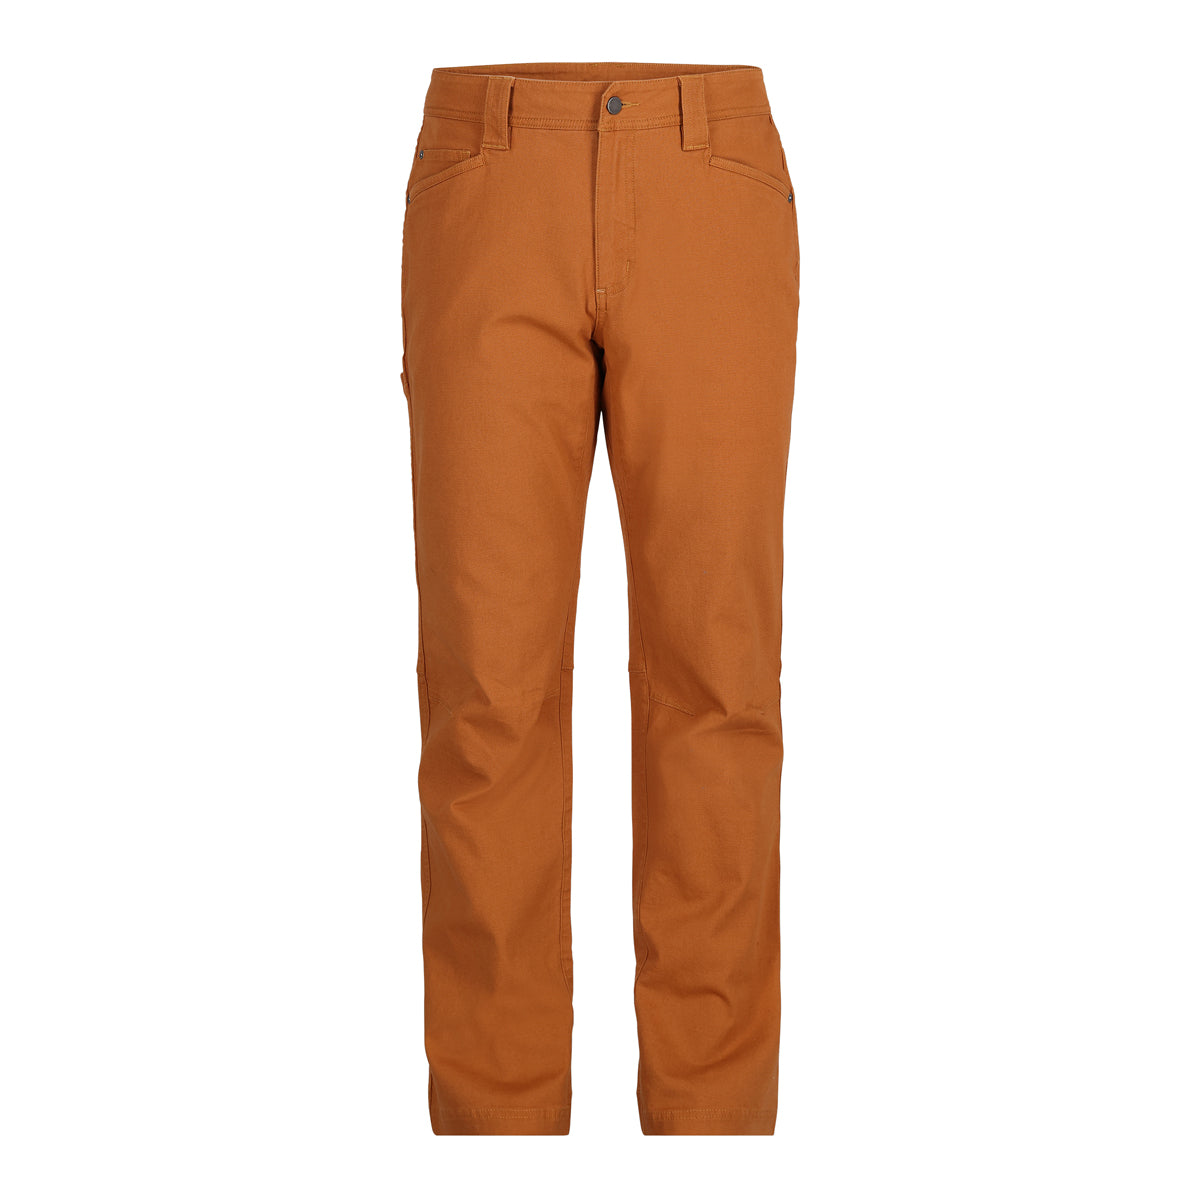 Simms Bugstopper Pant Closeout Sale